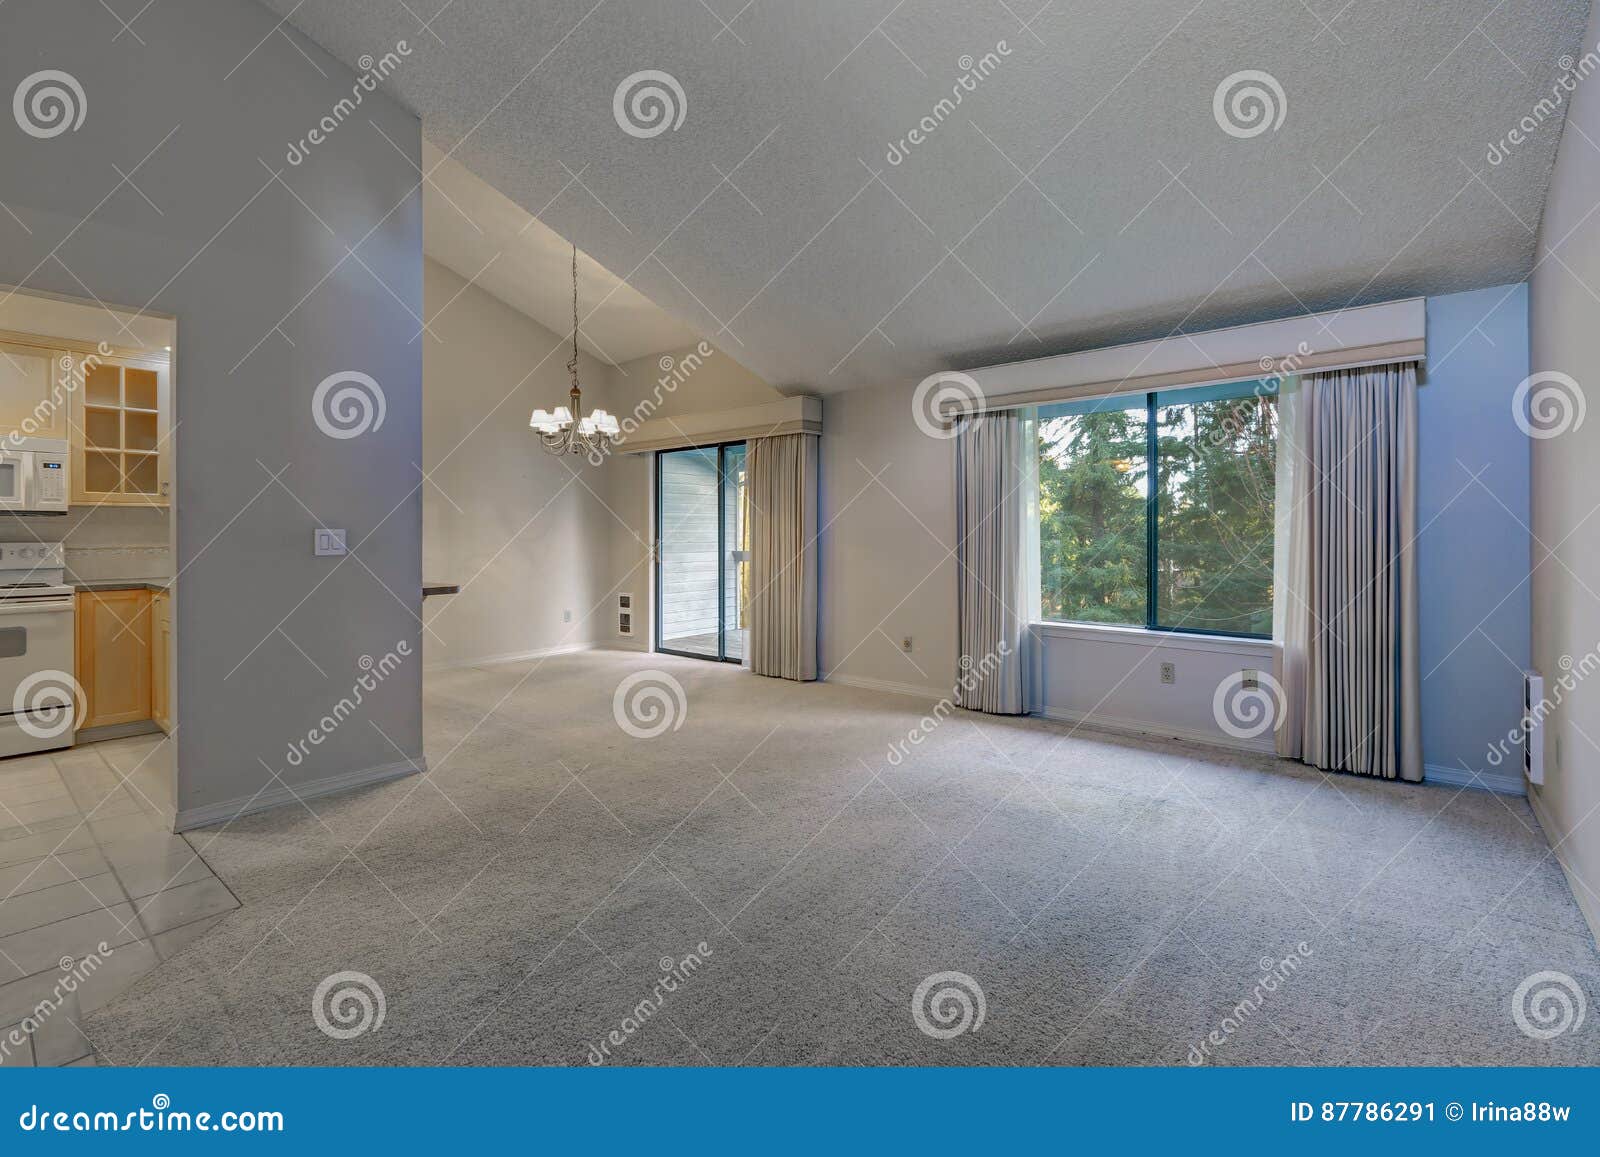 Empty Dining Space With Vaulted Ceiling And Grey Walls Stock Image